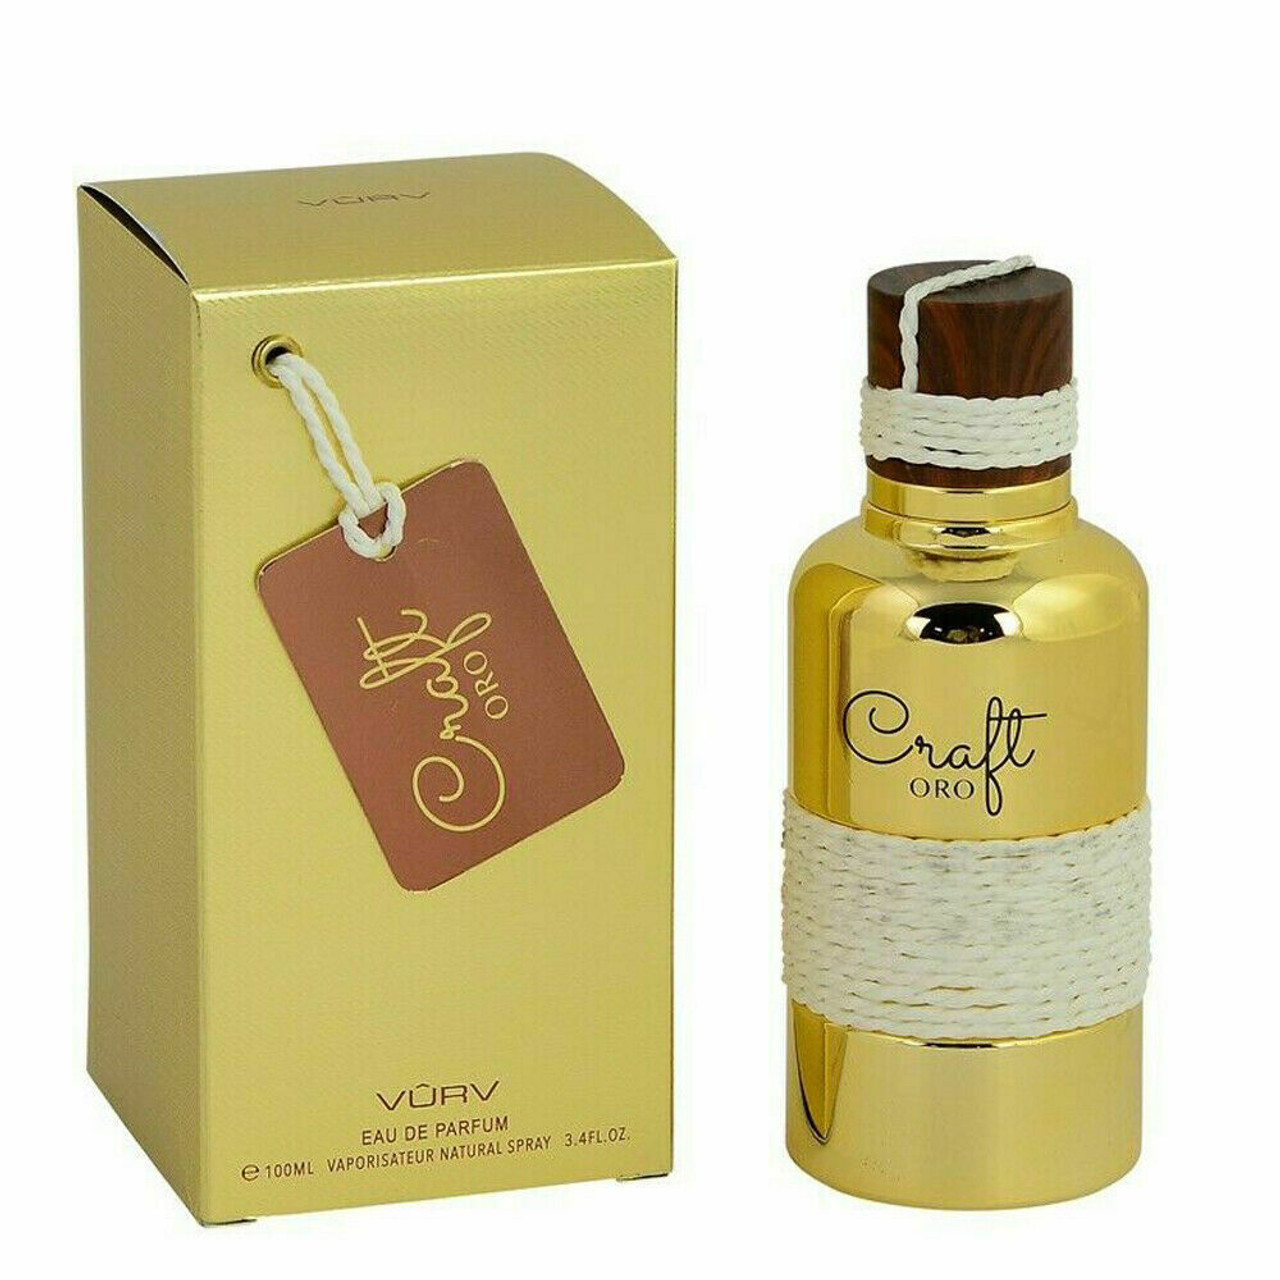 CRAFT ORO AND CRAFT NOIRE PERFUME AVAILABLE FOR MEN AND FEMALE PRICE 6000  HOW TO ORDER 1. SCREENSHOT THE ITEM U WANT 2. SEND TO DM OR TO OUR  WHATAPP